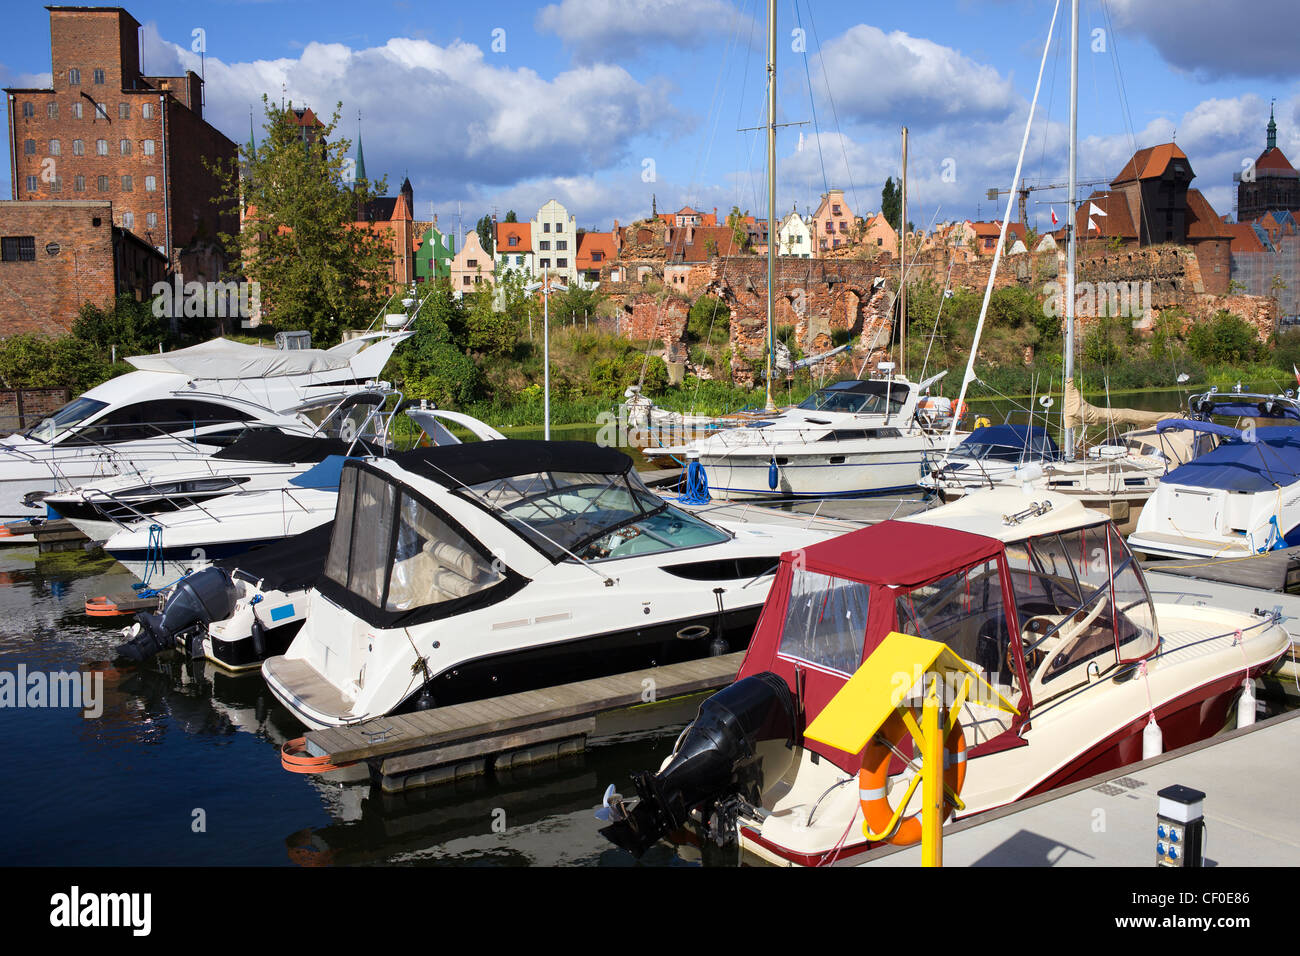 Motorboats and sailboats at the marina in the city of Gdansk in Poland Stock Photo